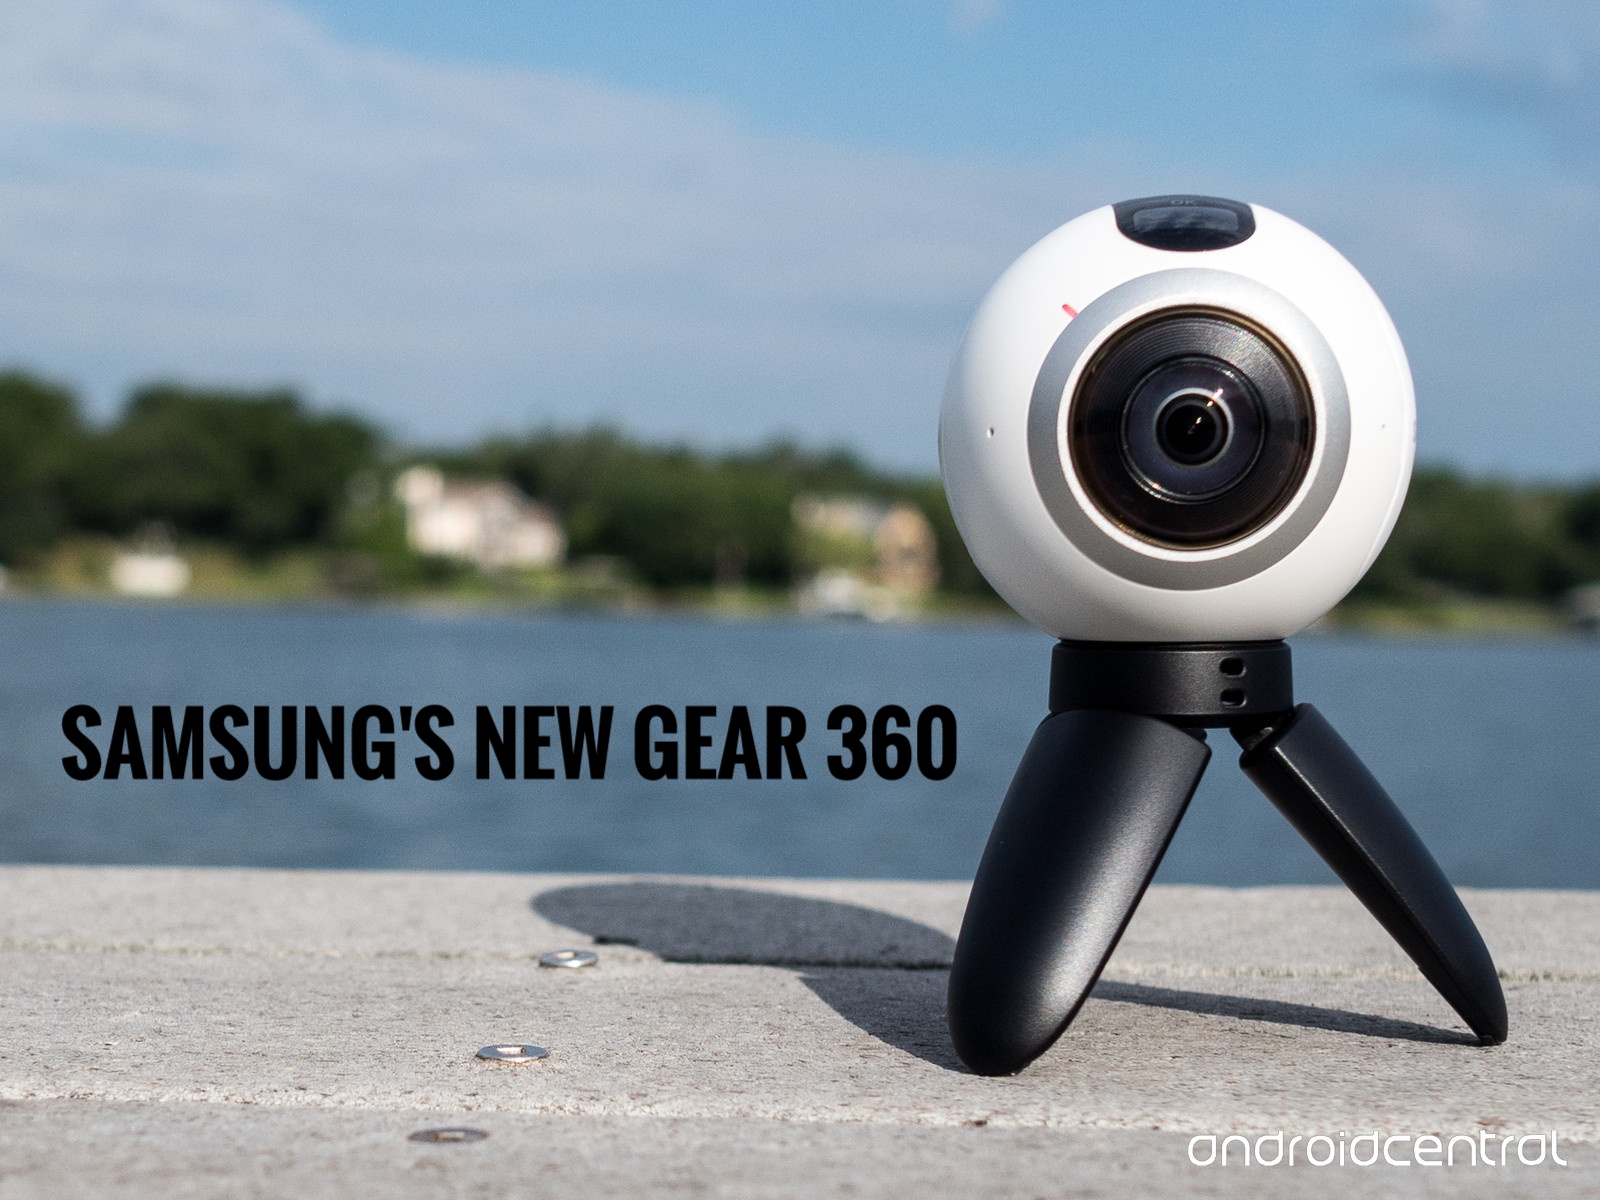 Samsung Gear 360 camera shoots in 4k and now works with